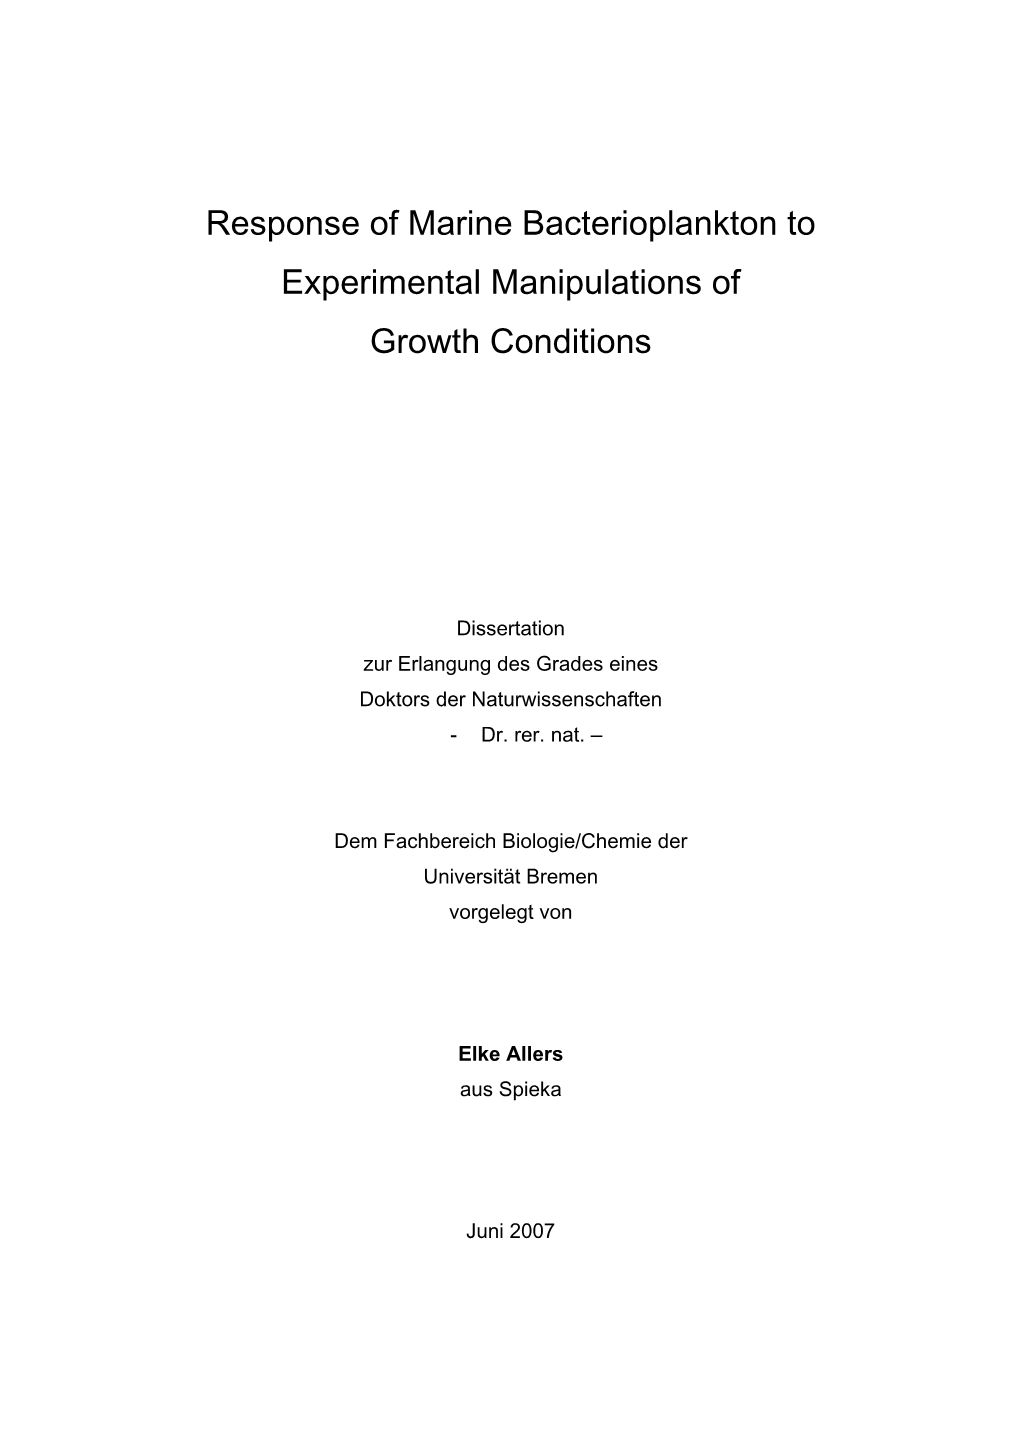 Response of Marine Bacterioplankton to Experimental Manipulations of Growth Conditions